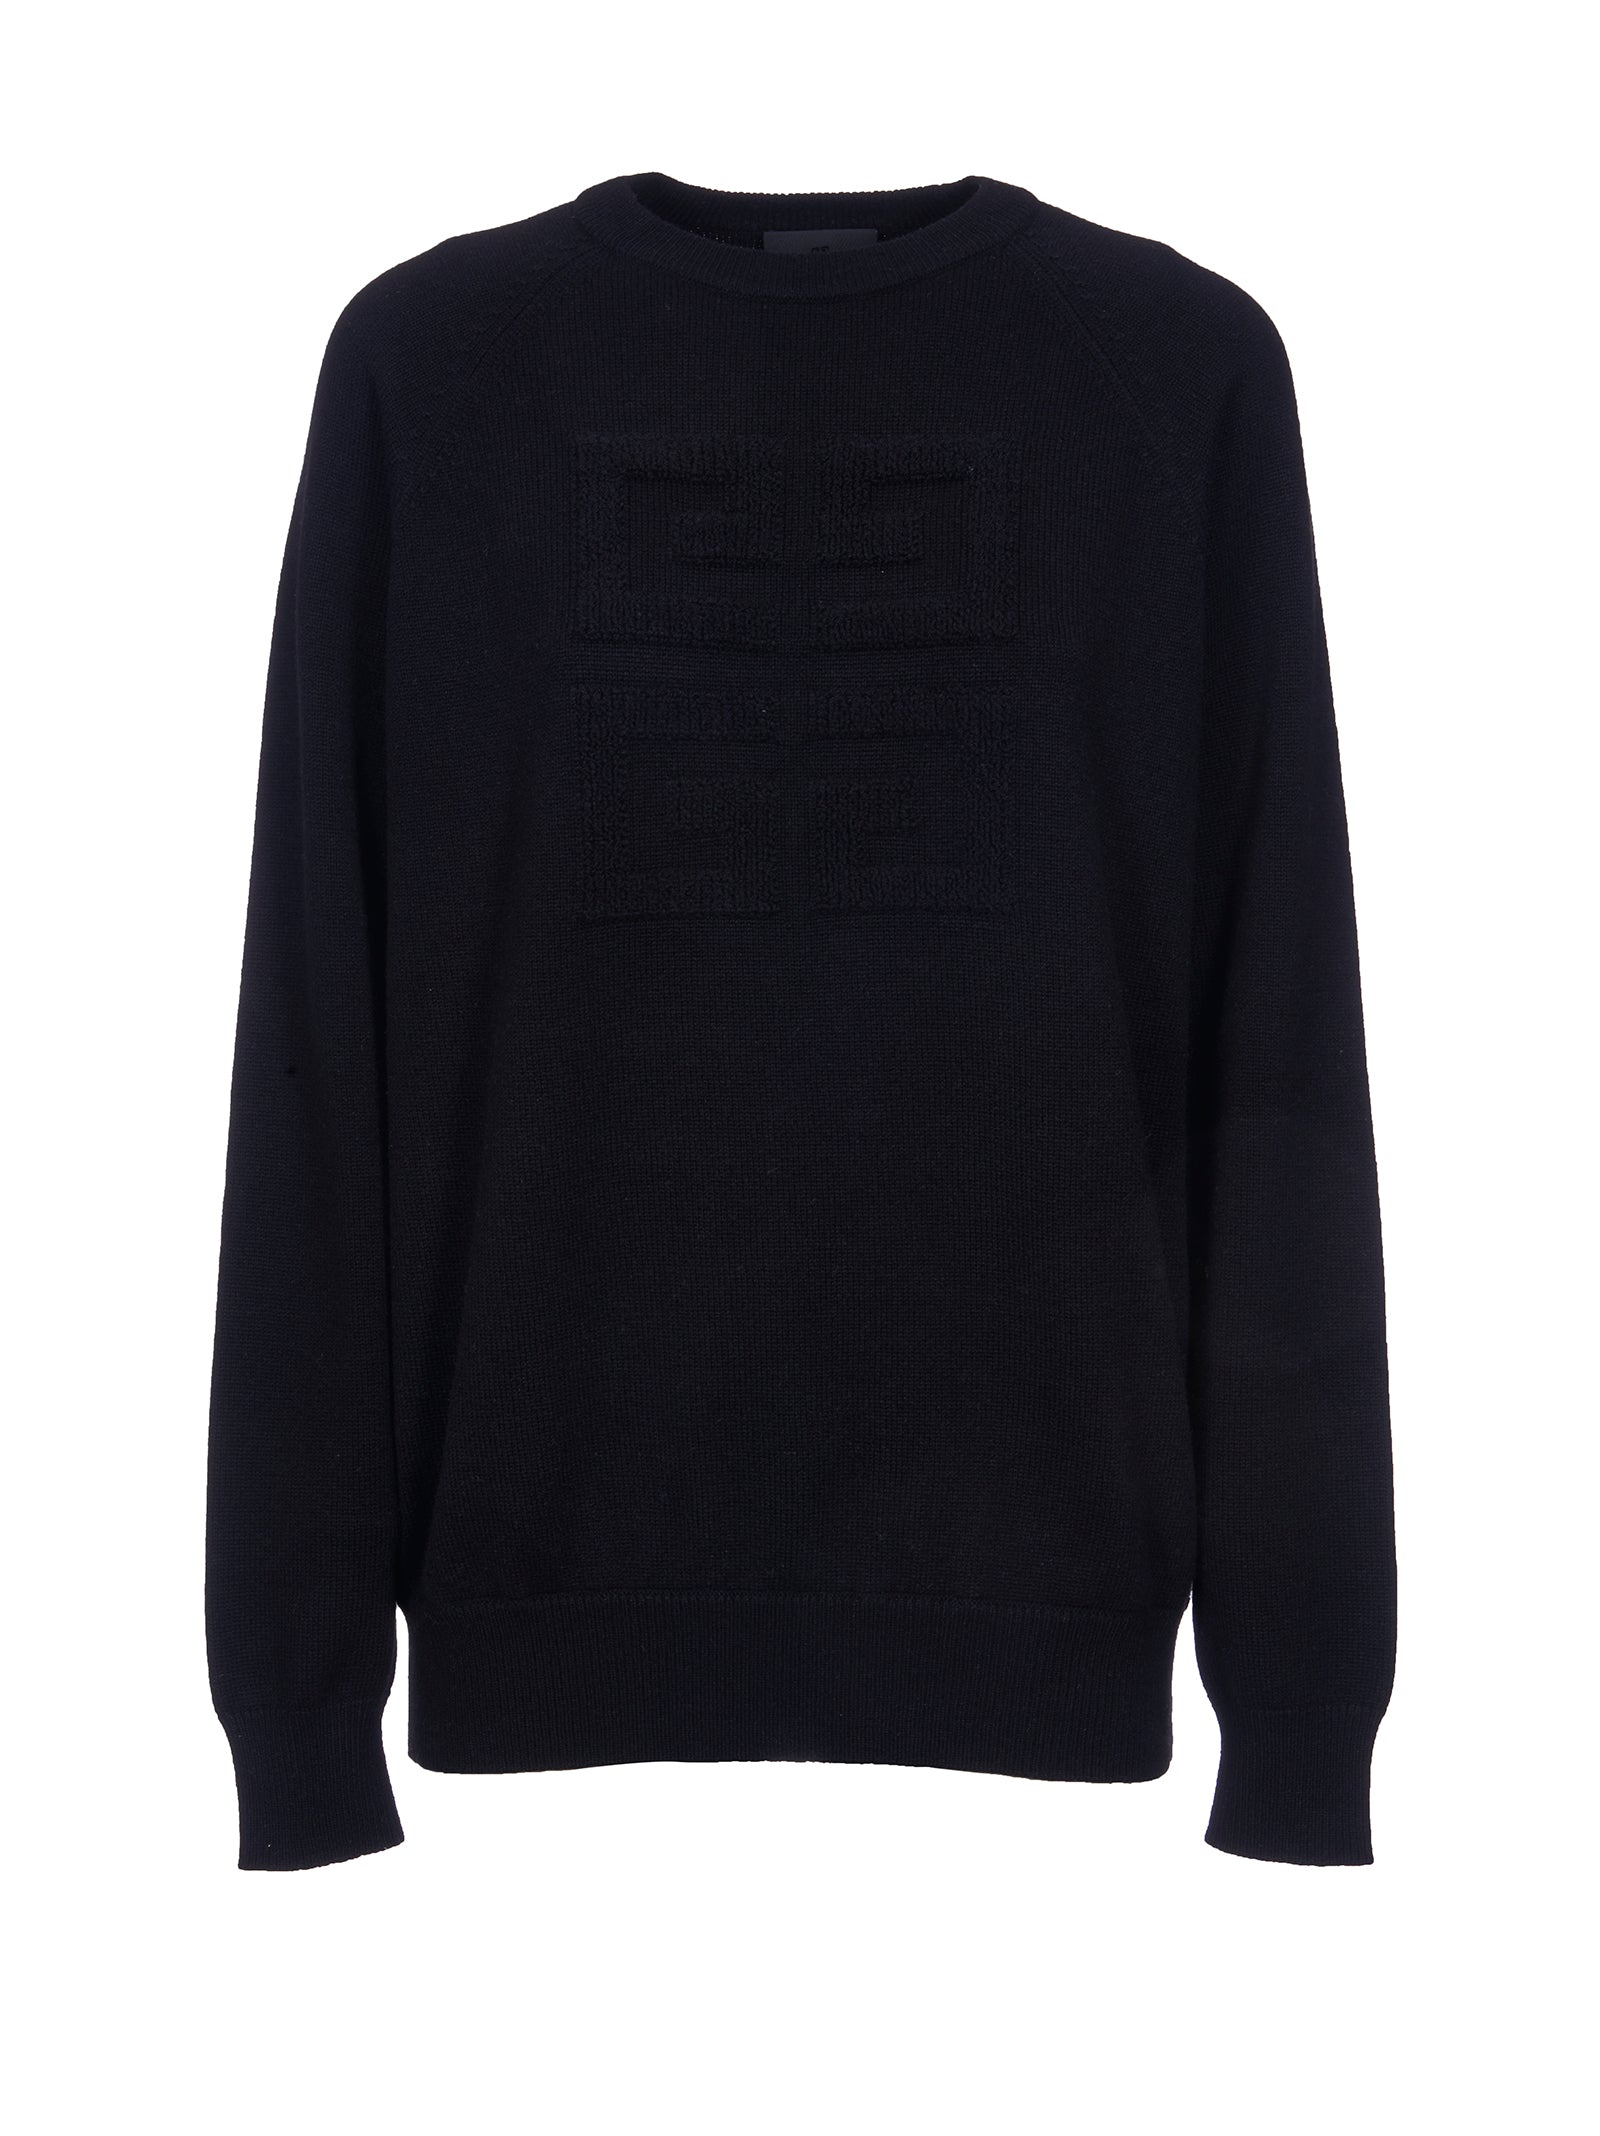 4G front logo sweater